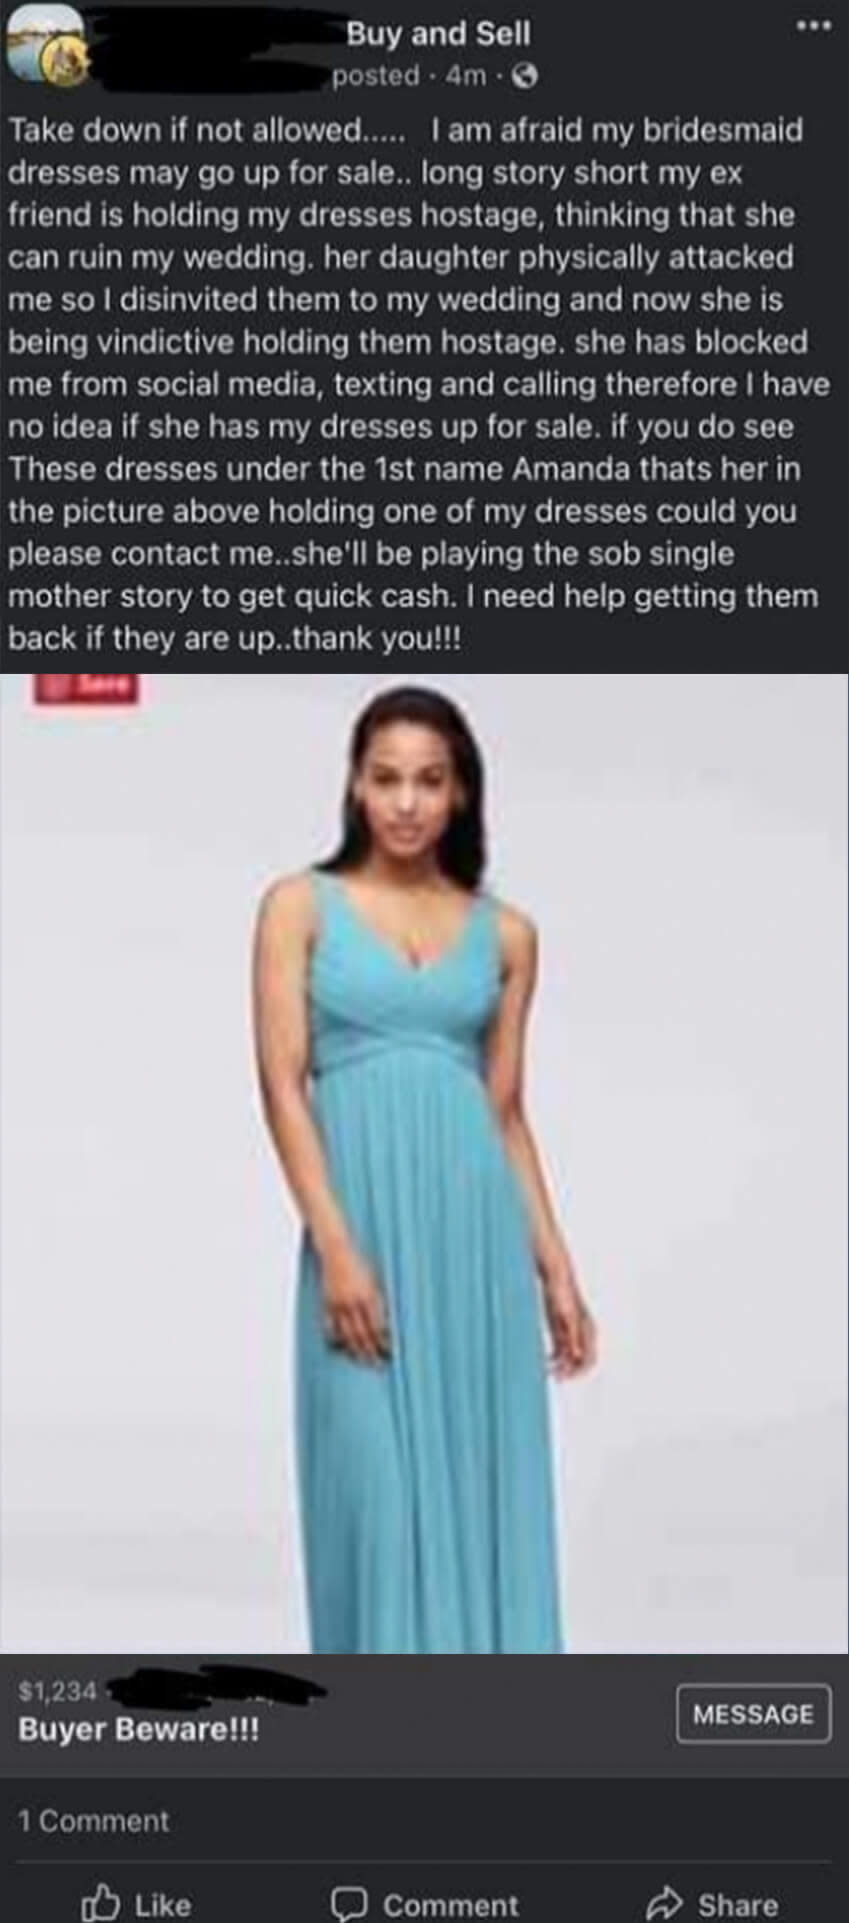 post saying former bridesmaid is holding all the bridesmaid dresses hostage and trying to sell them in an attempt to sabotage the wedding, so don't buy from her